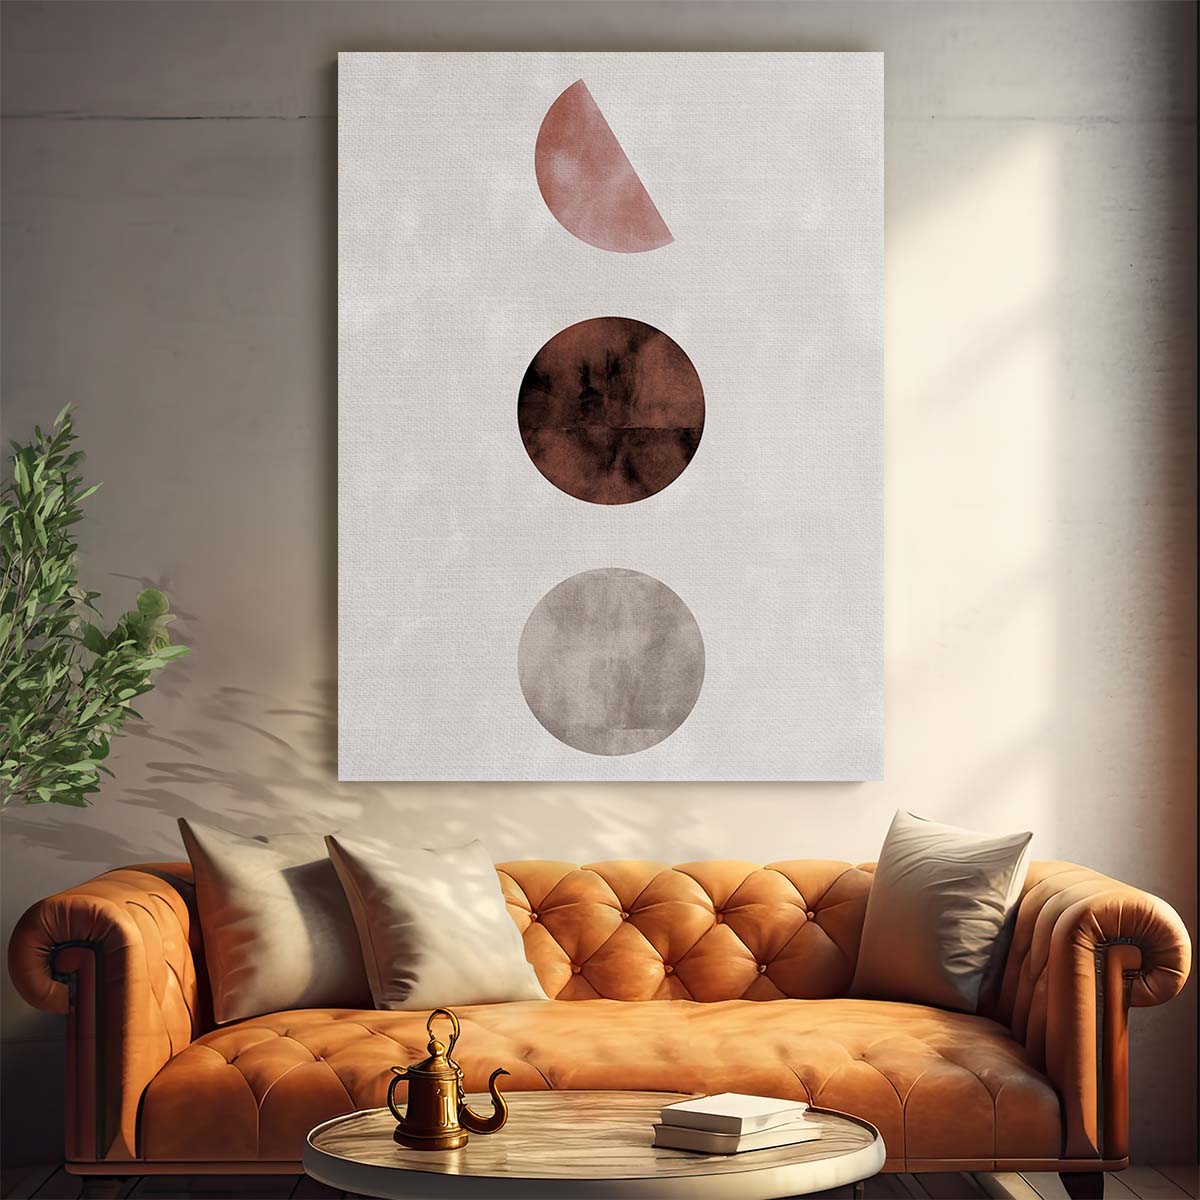 Abstract Geometric Space Planets Circle Illustration Wall Art by Luxuriance Designs, made in USA